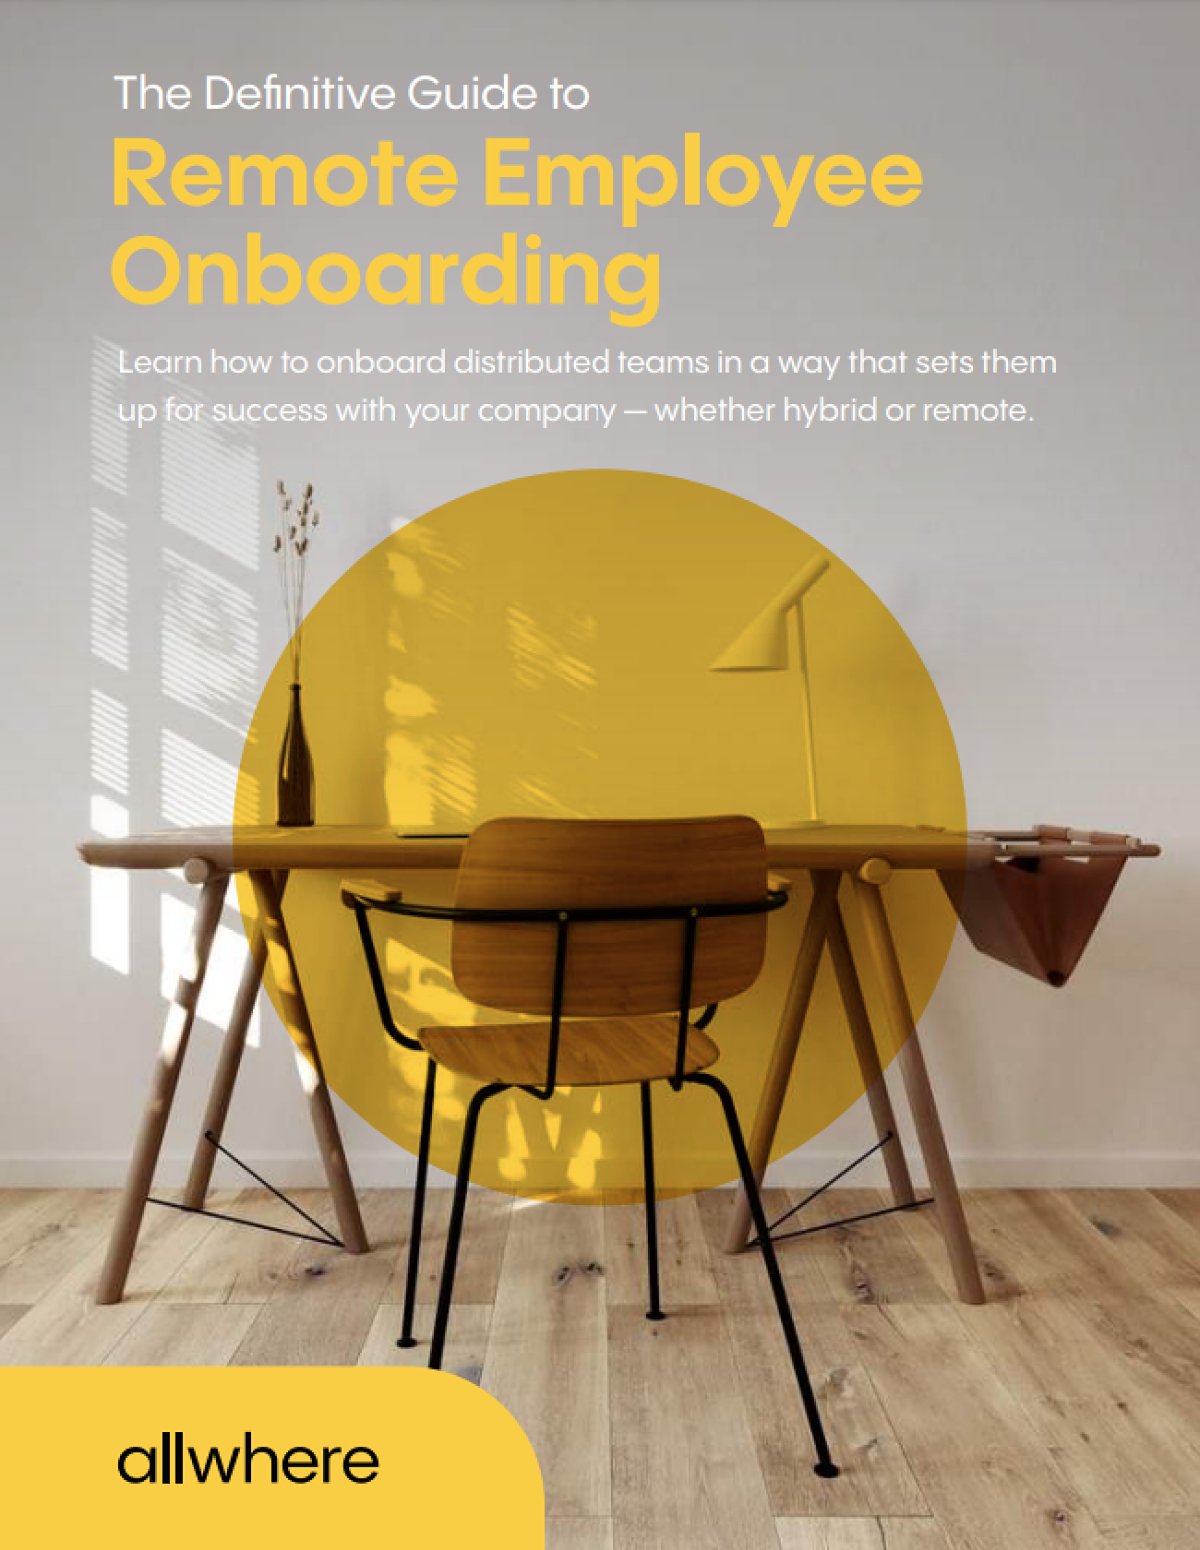 The Definitive Guide to Remote Employee Onboarding